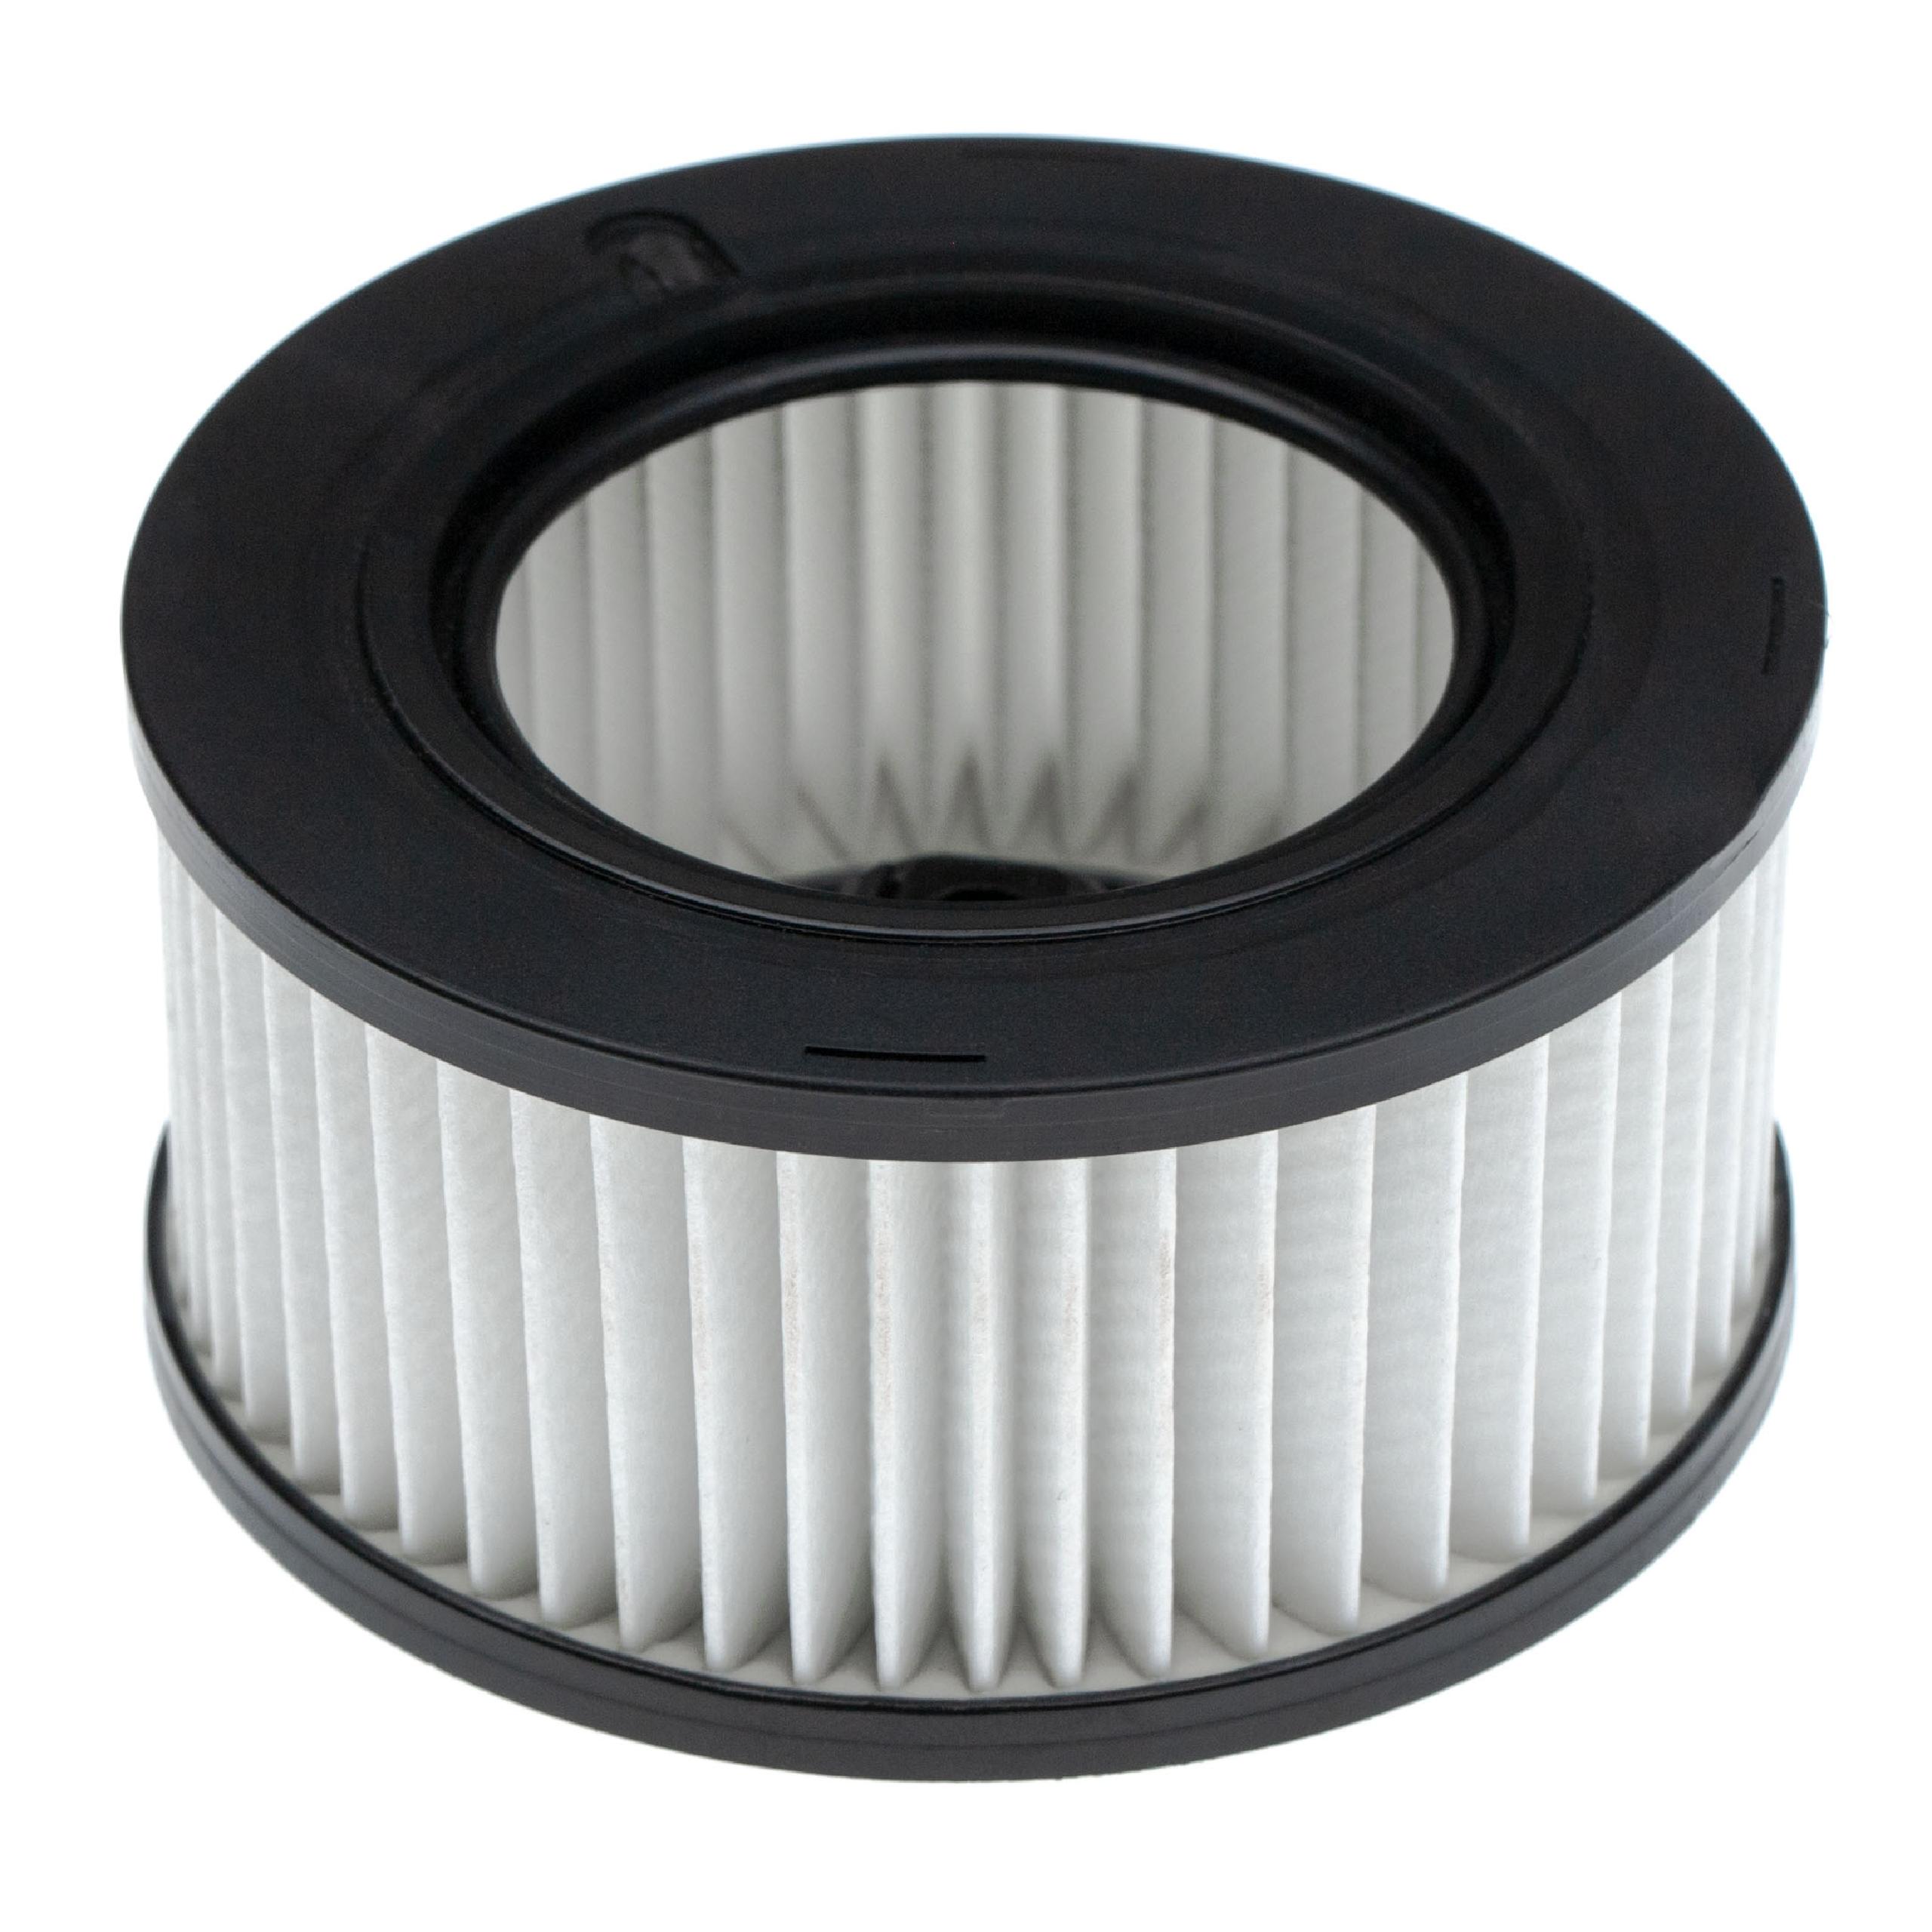 Filter replaces Stihl 11411201604, 1141 120 1604, 1141-120-1604 for Power Saw - HD2-Luftfilter